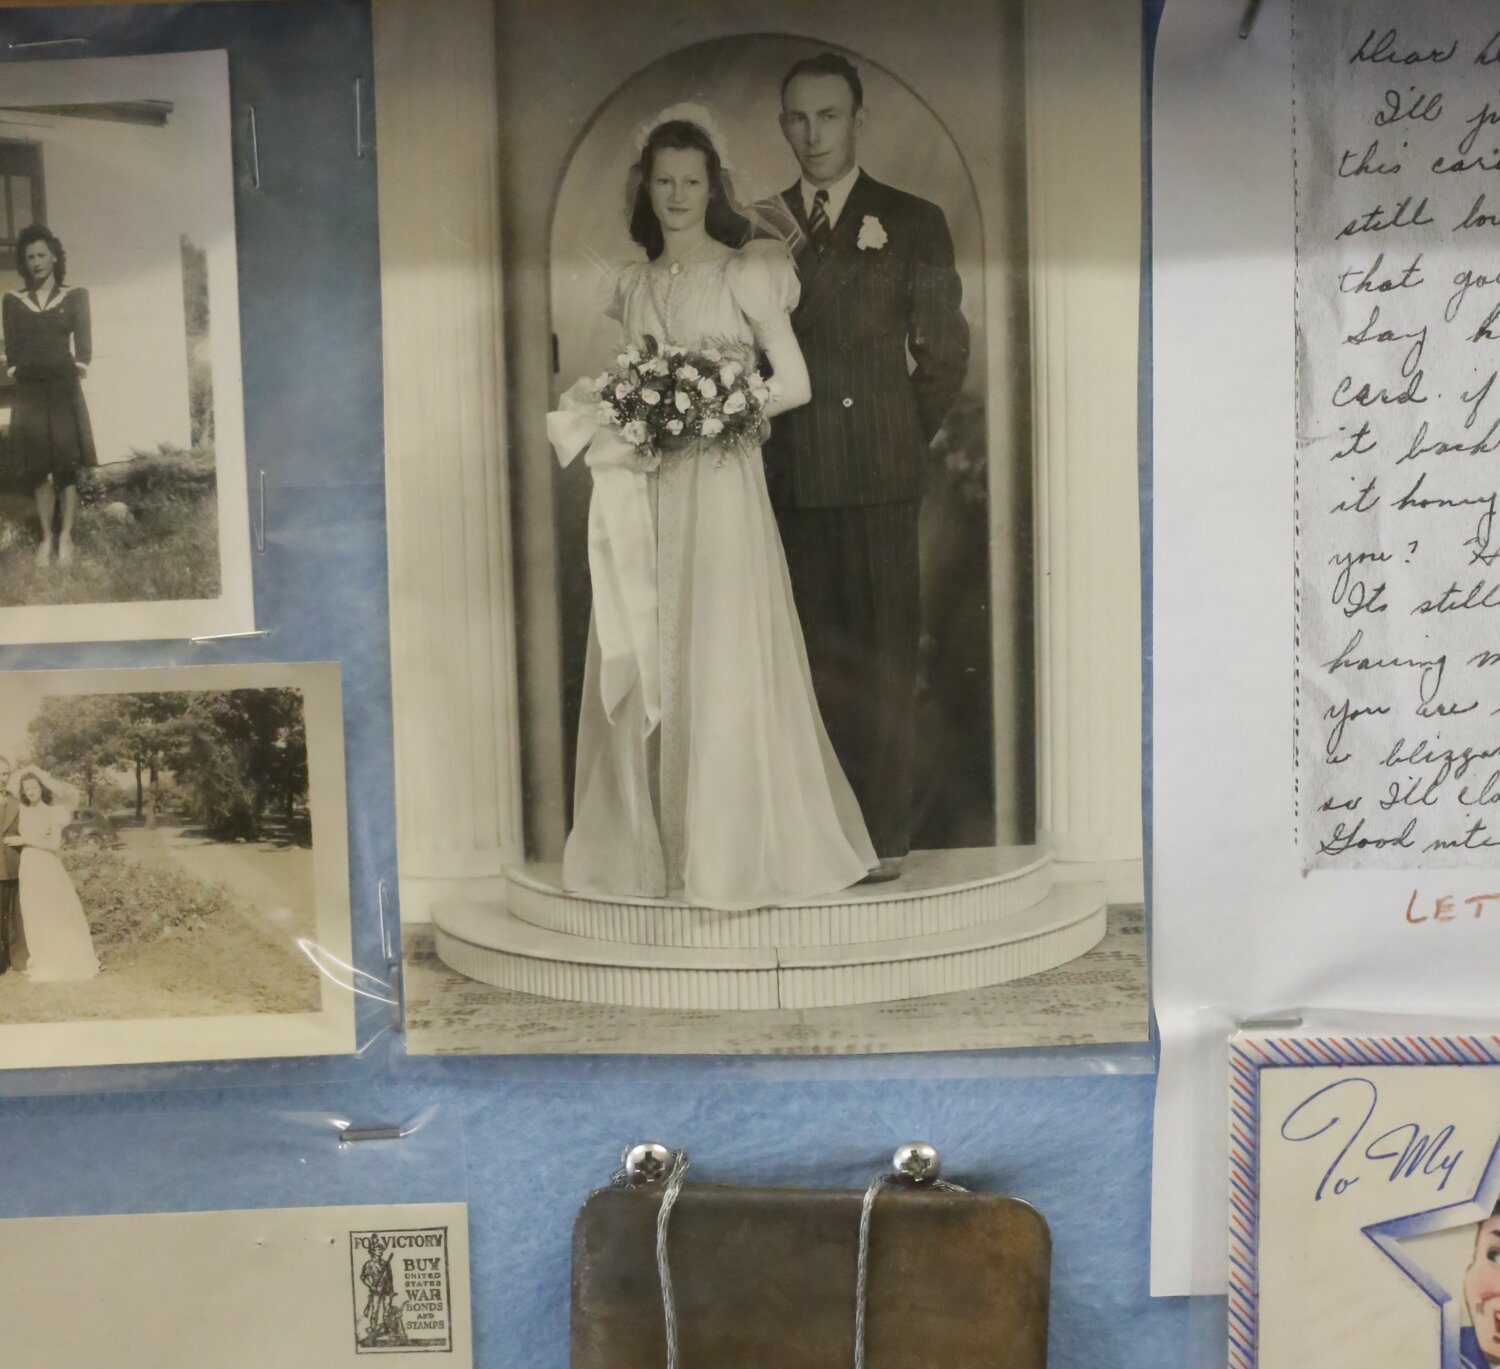 A partial view of the Harms exhibit, with a wedding day photo of Howard and Millie.